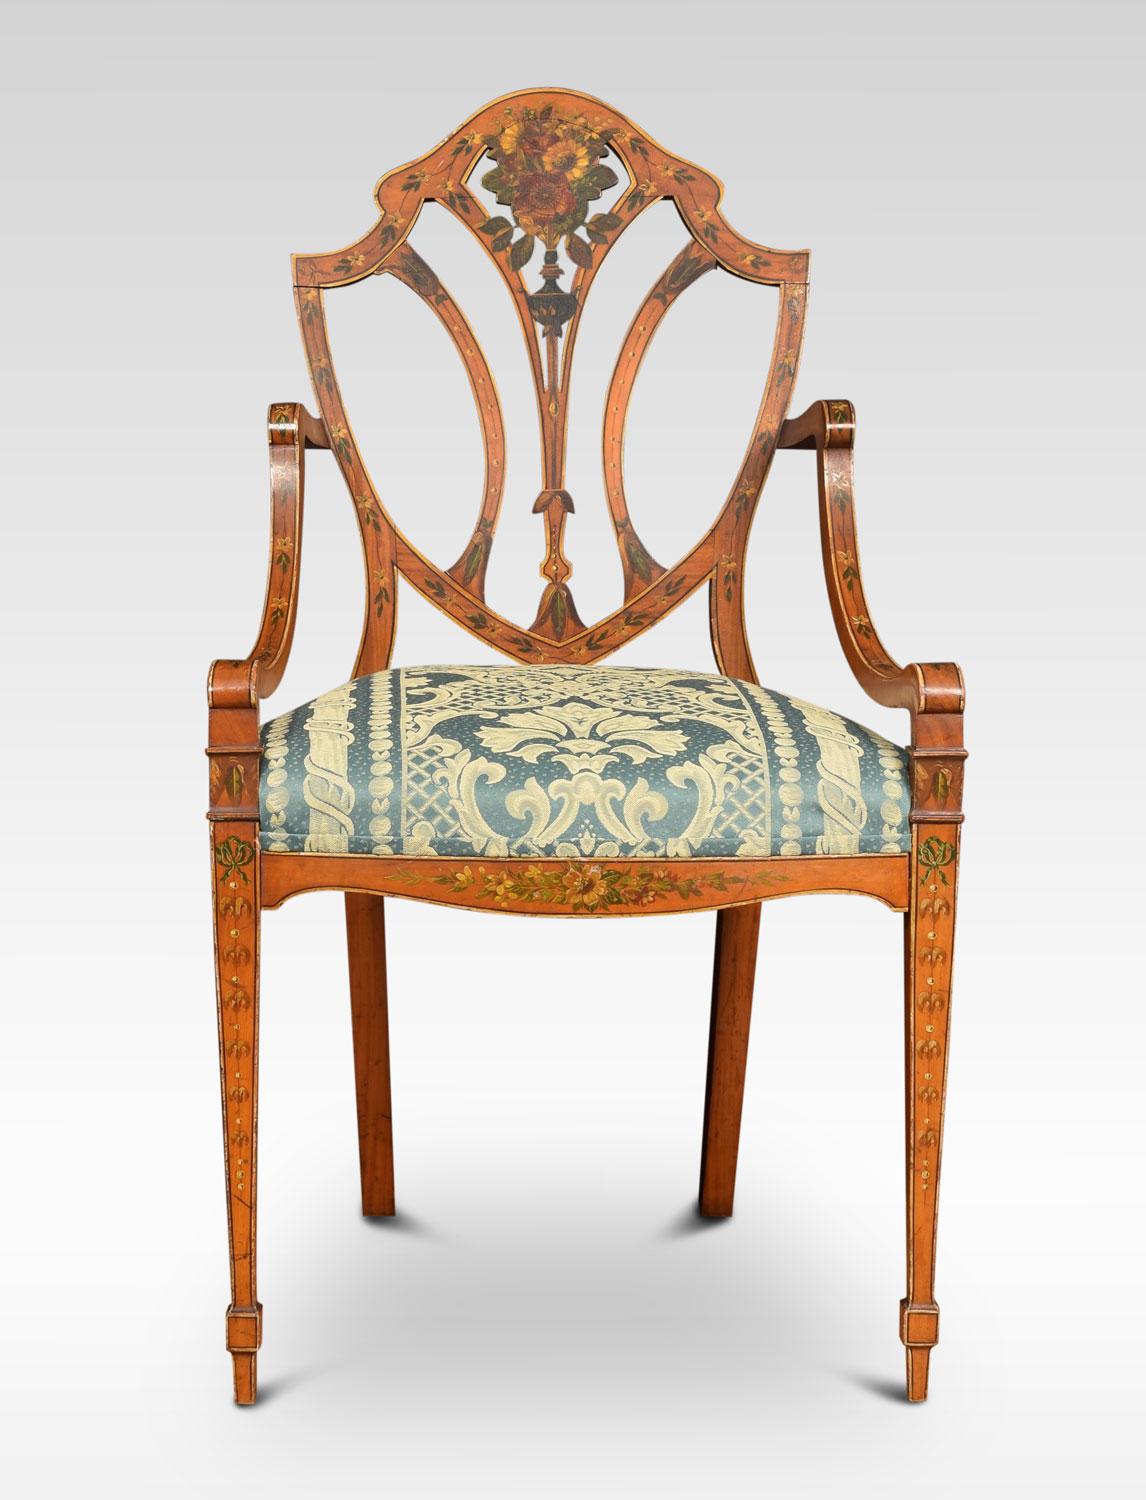 Late 19th century Sheraton Revival satinwood elbow chair, painted overall with flowers and leaves, the shield shaped back with pierced splat, with down swept arms, padded seat all raised up on tapering legs terminating in spade